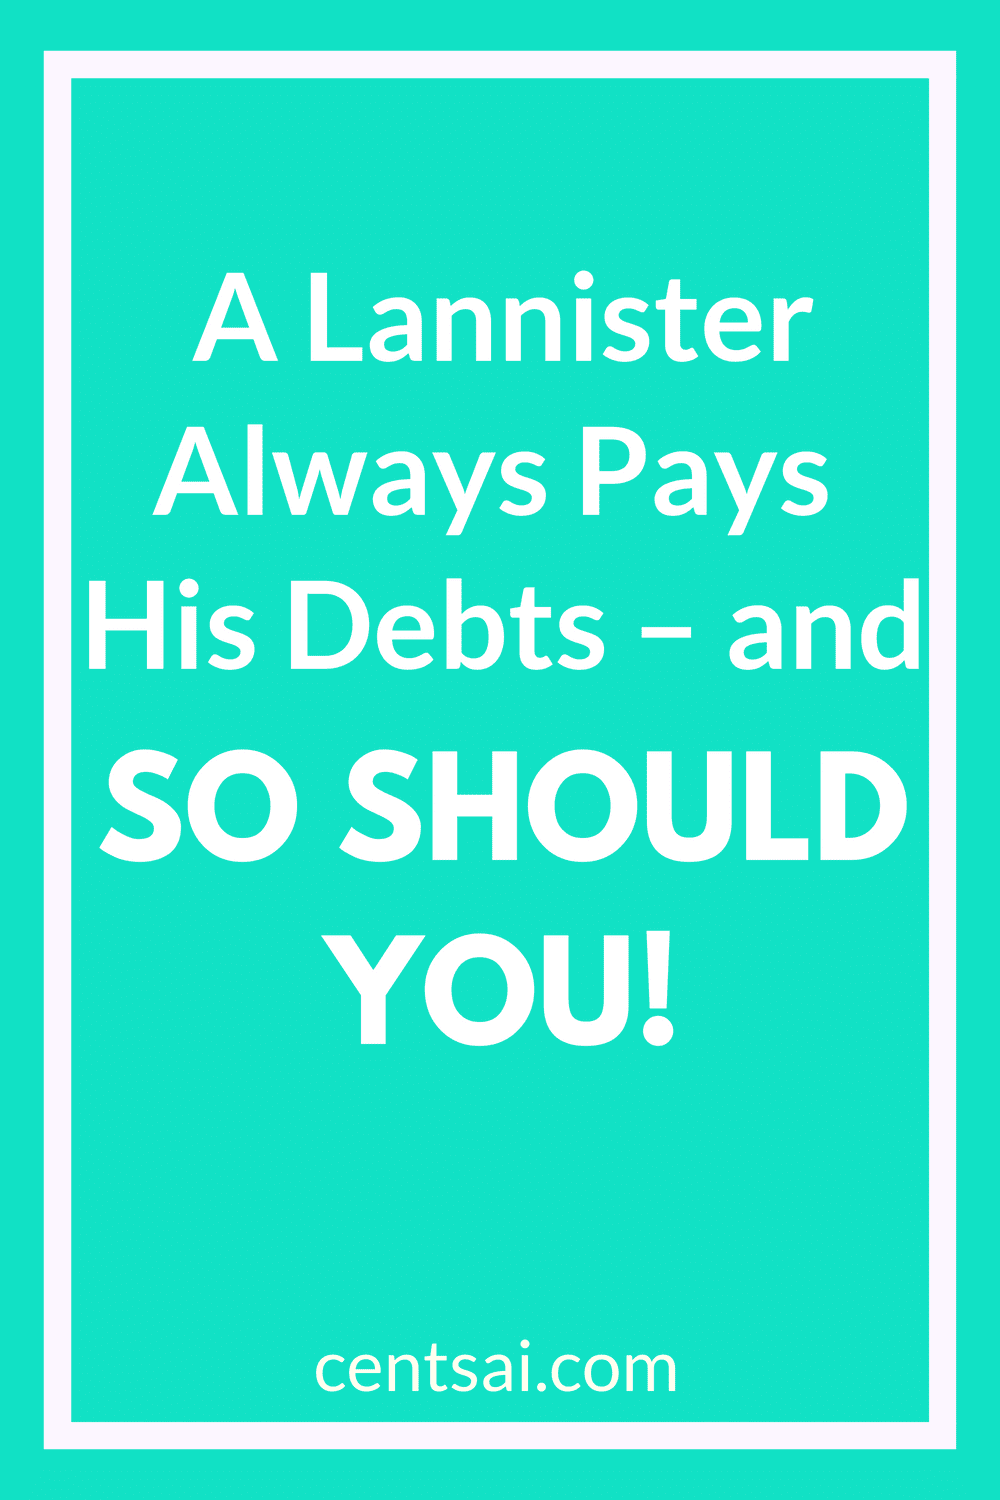 A Lannister Always Pays His Debts – and So Should You! You can achieve great financial success through plundering mines, making alliances, and going on joint ventures. Plus, if you’re a Lannister, some good, old-fashioned murder helps, too. #financialindependence #debtpayment